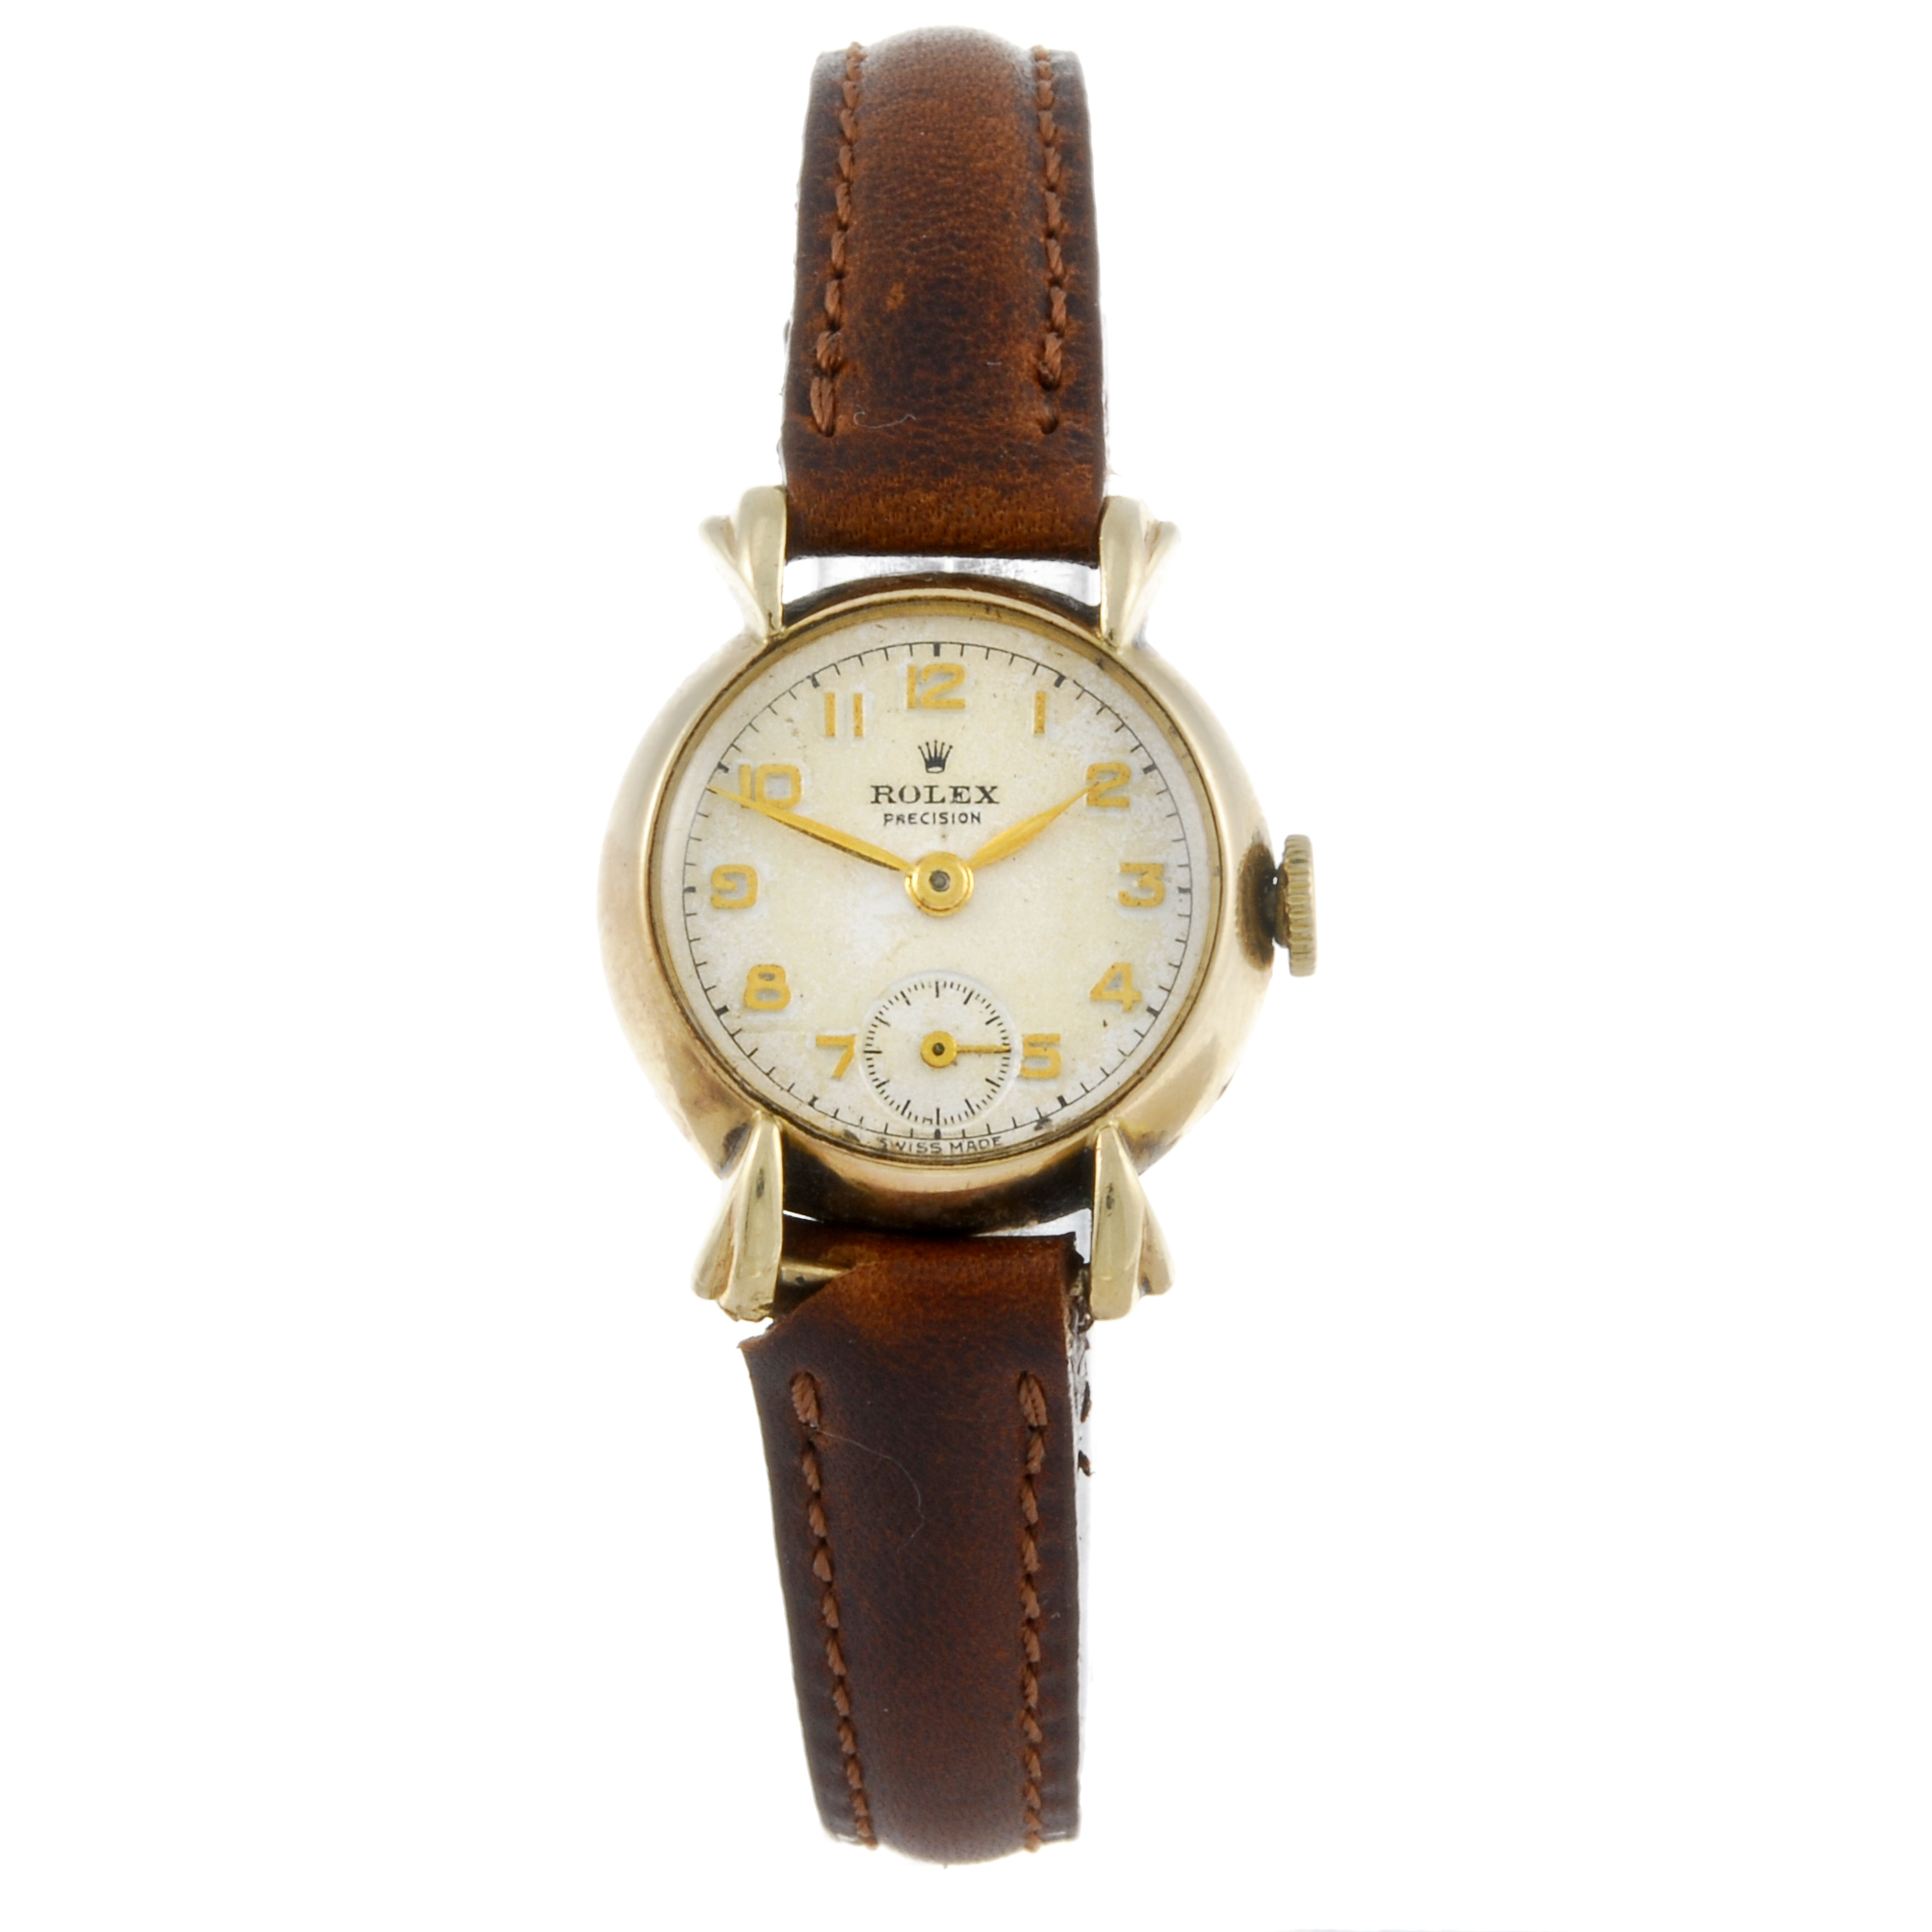 ROLEX - a lady's Precision wrist watch. 9ct yellow gold case, hallmarked Chester 1952. Numbered